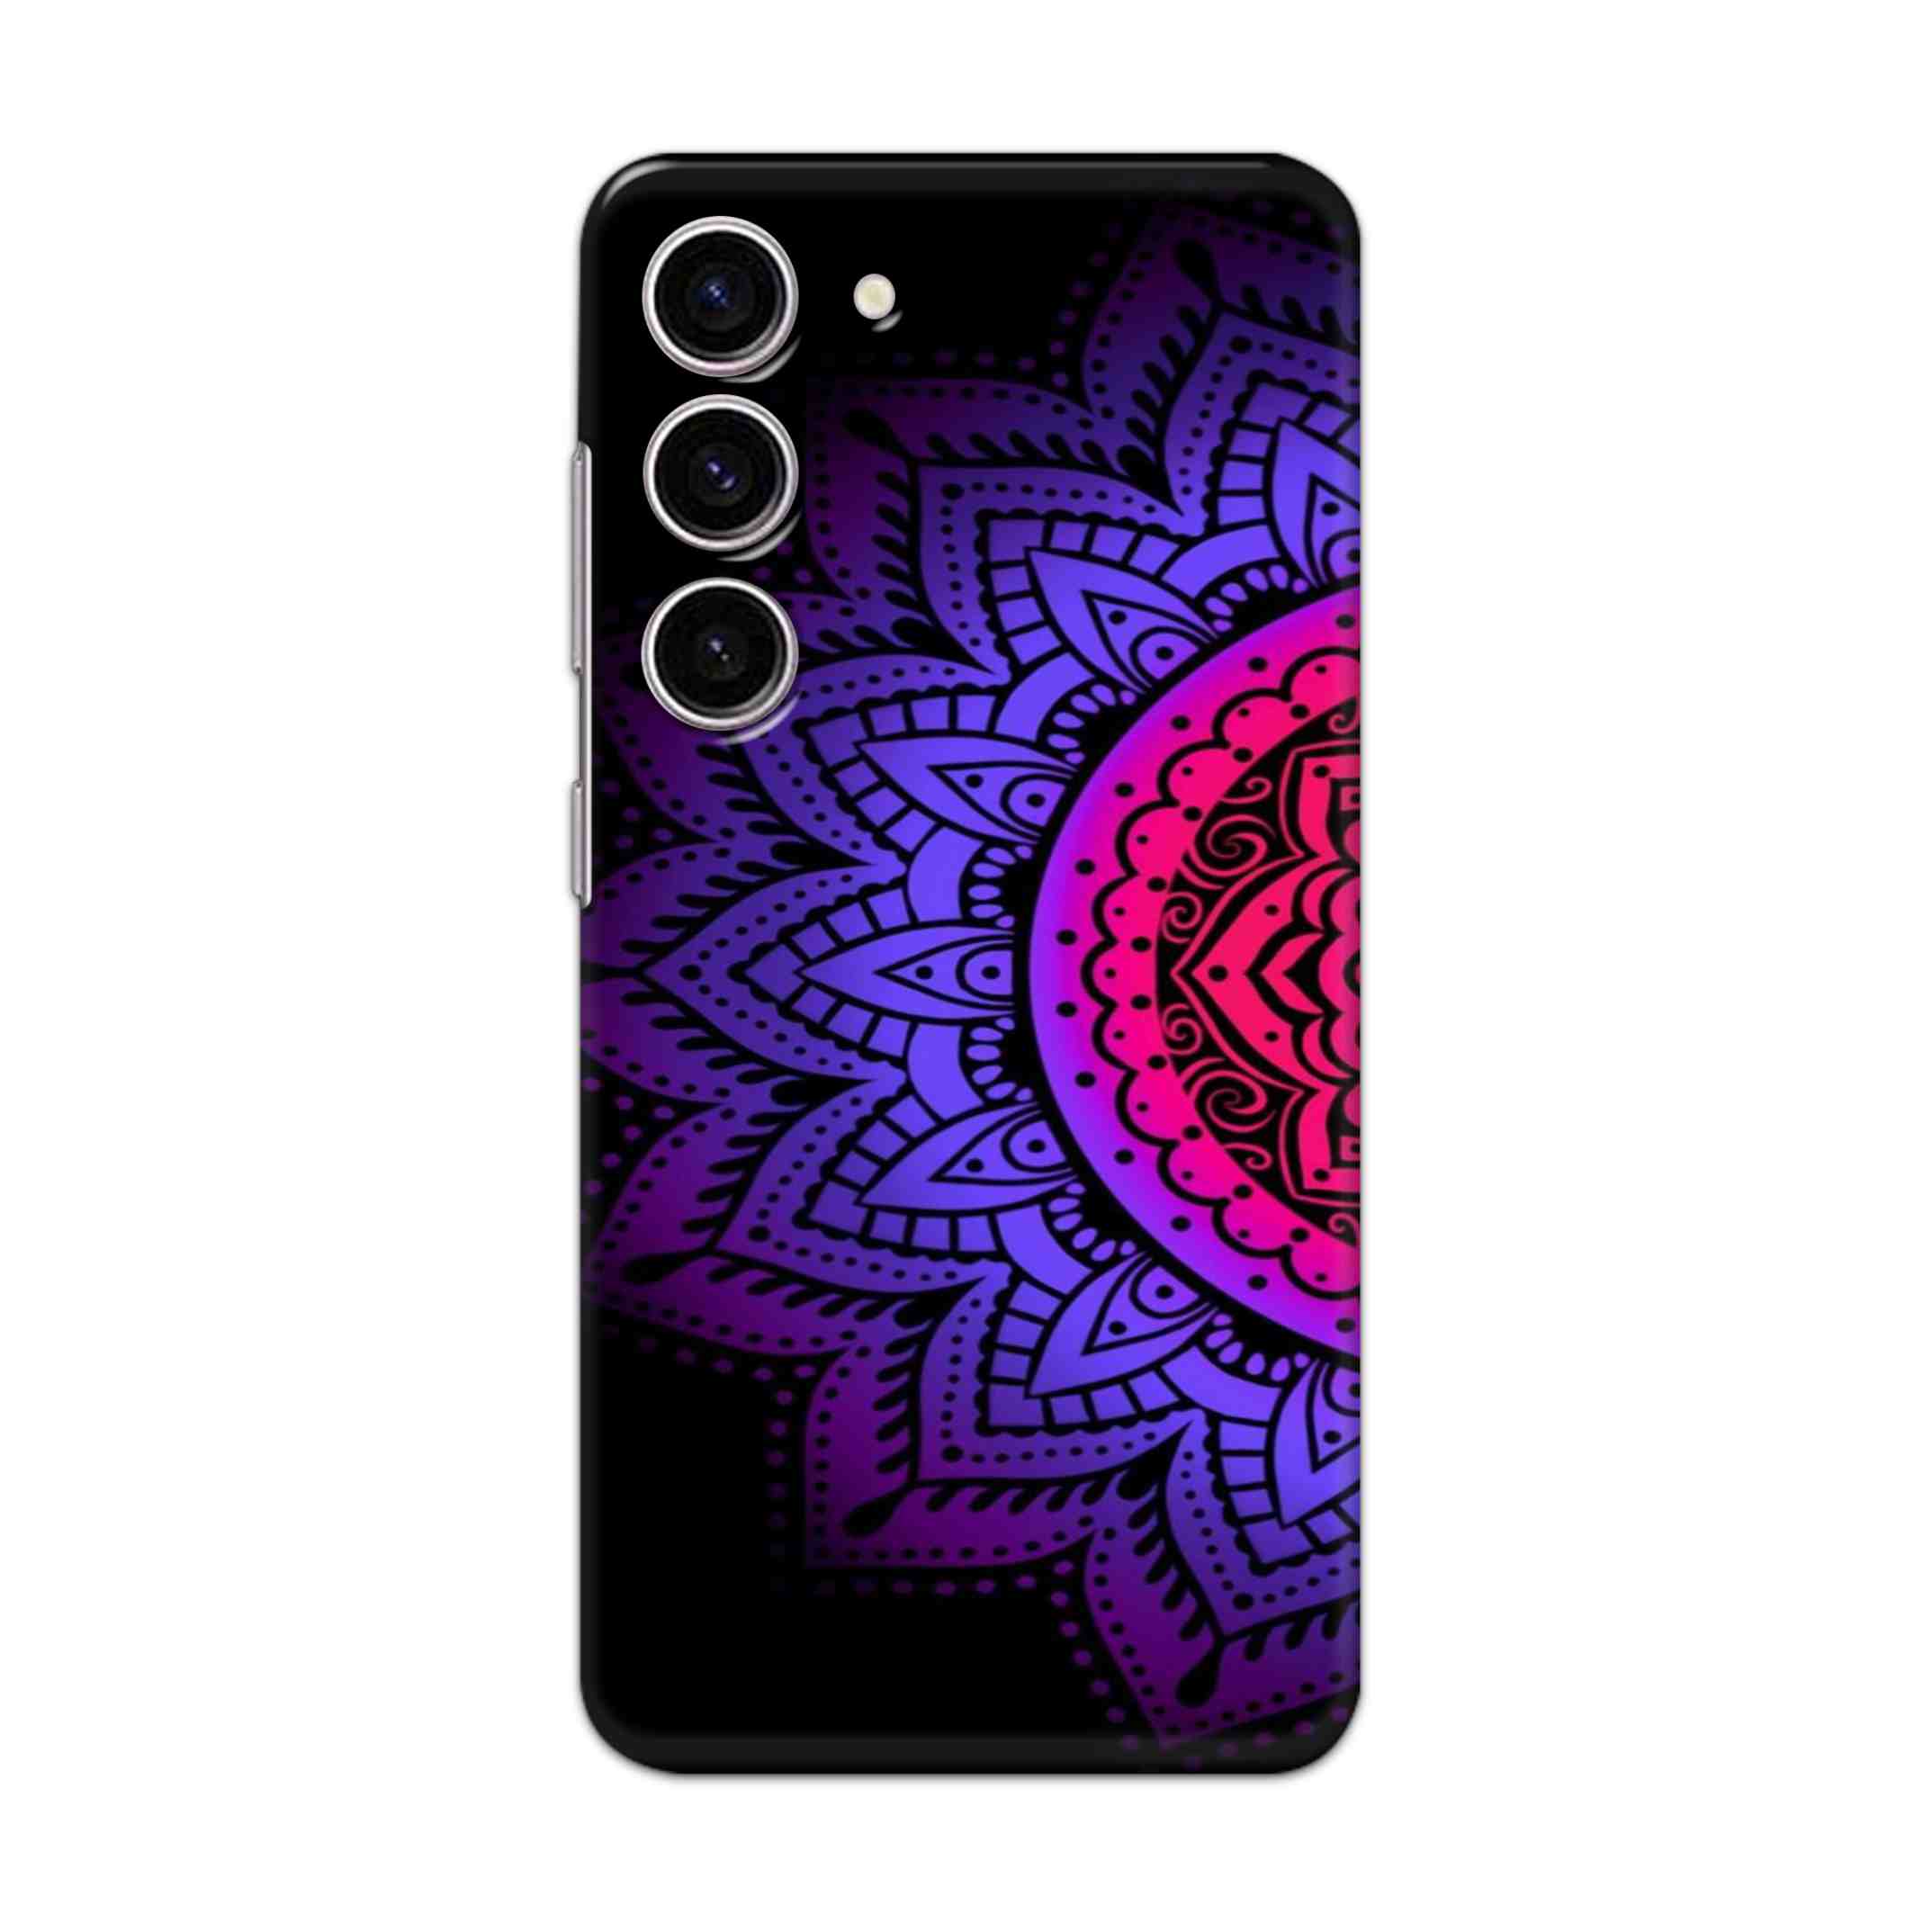 Buy Christian Mandalas Hard Back Mobile Phone Case/Cover For Samsung Galaxy S23 Plus Online